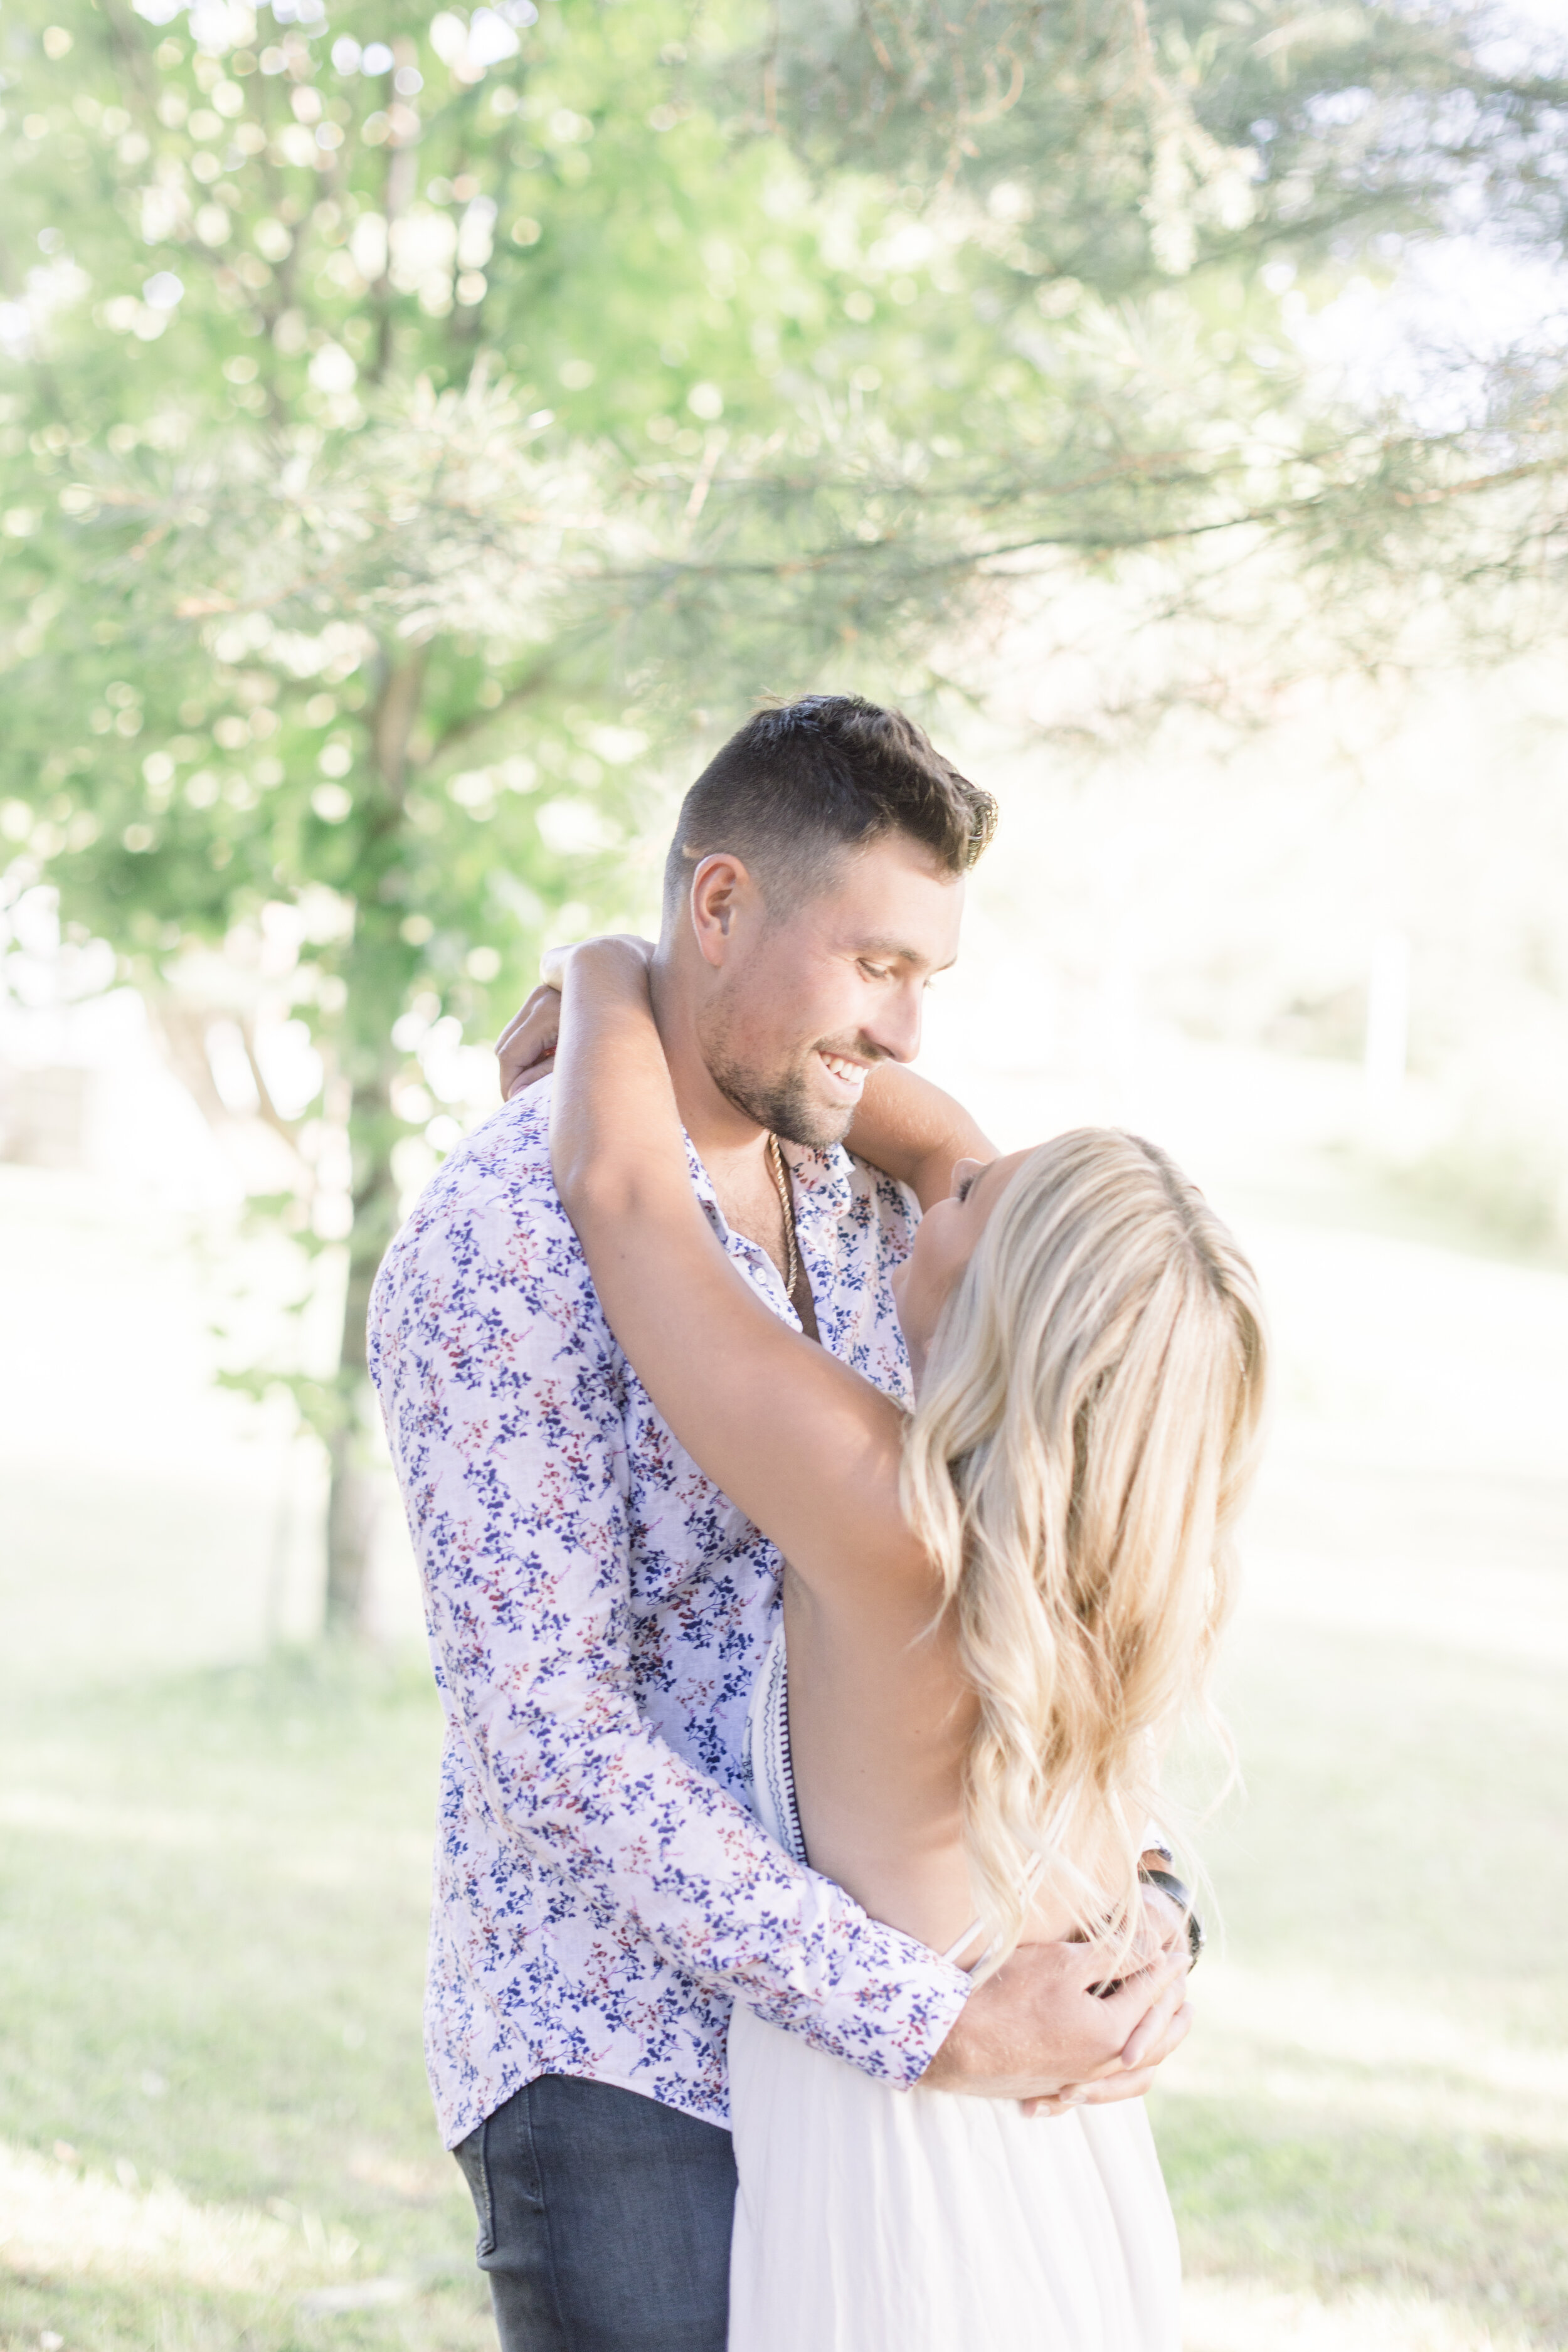  Handsome groom-to-be looks lovingly into his fiancés eyes as he wraps his arms around her waist in a loving embrace as they take their summer engagement photos in a grassy field. Summer engagement photos summer engagement photo outfit inspo sunset e